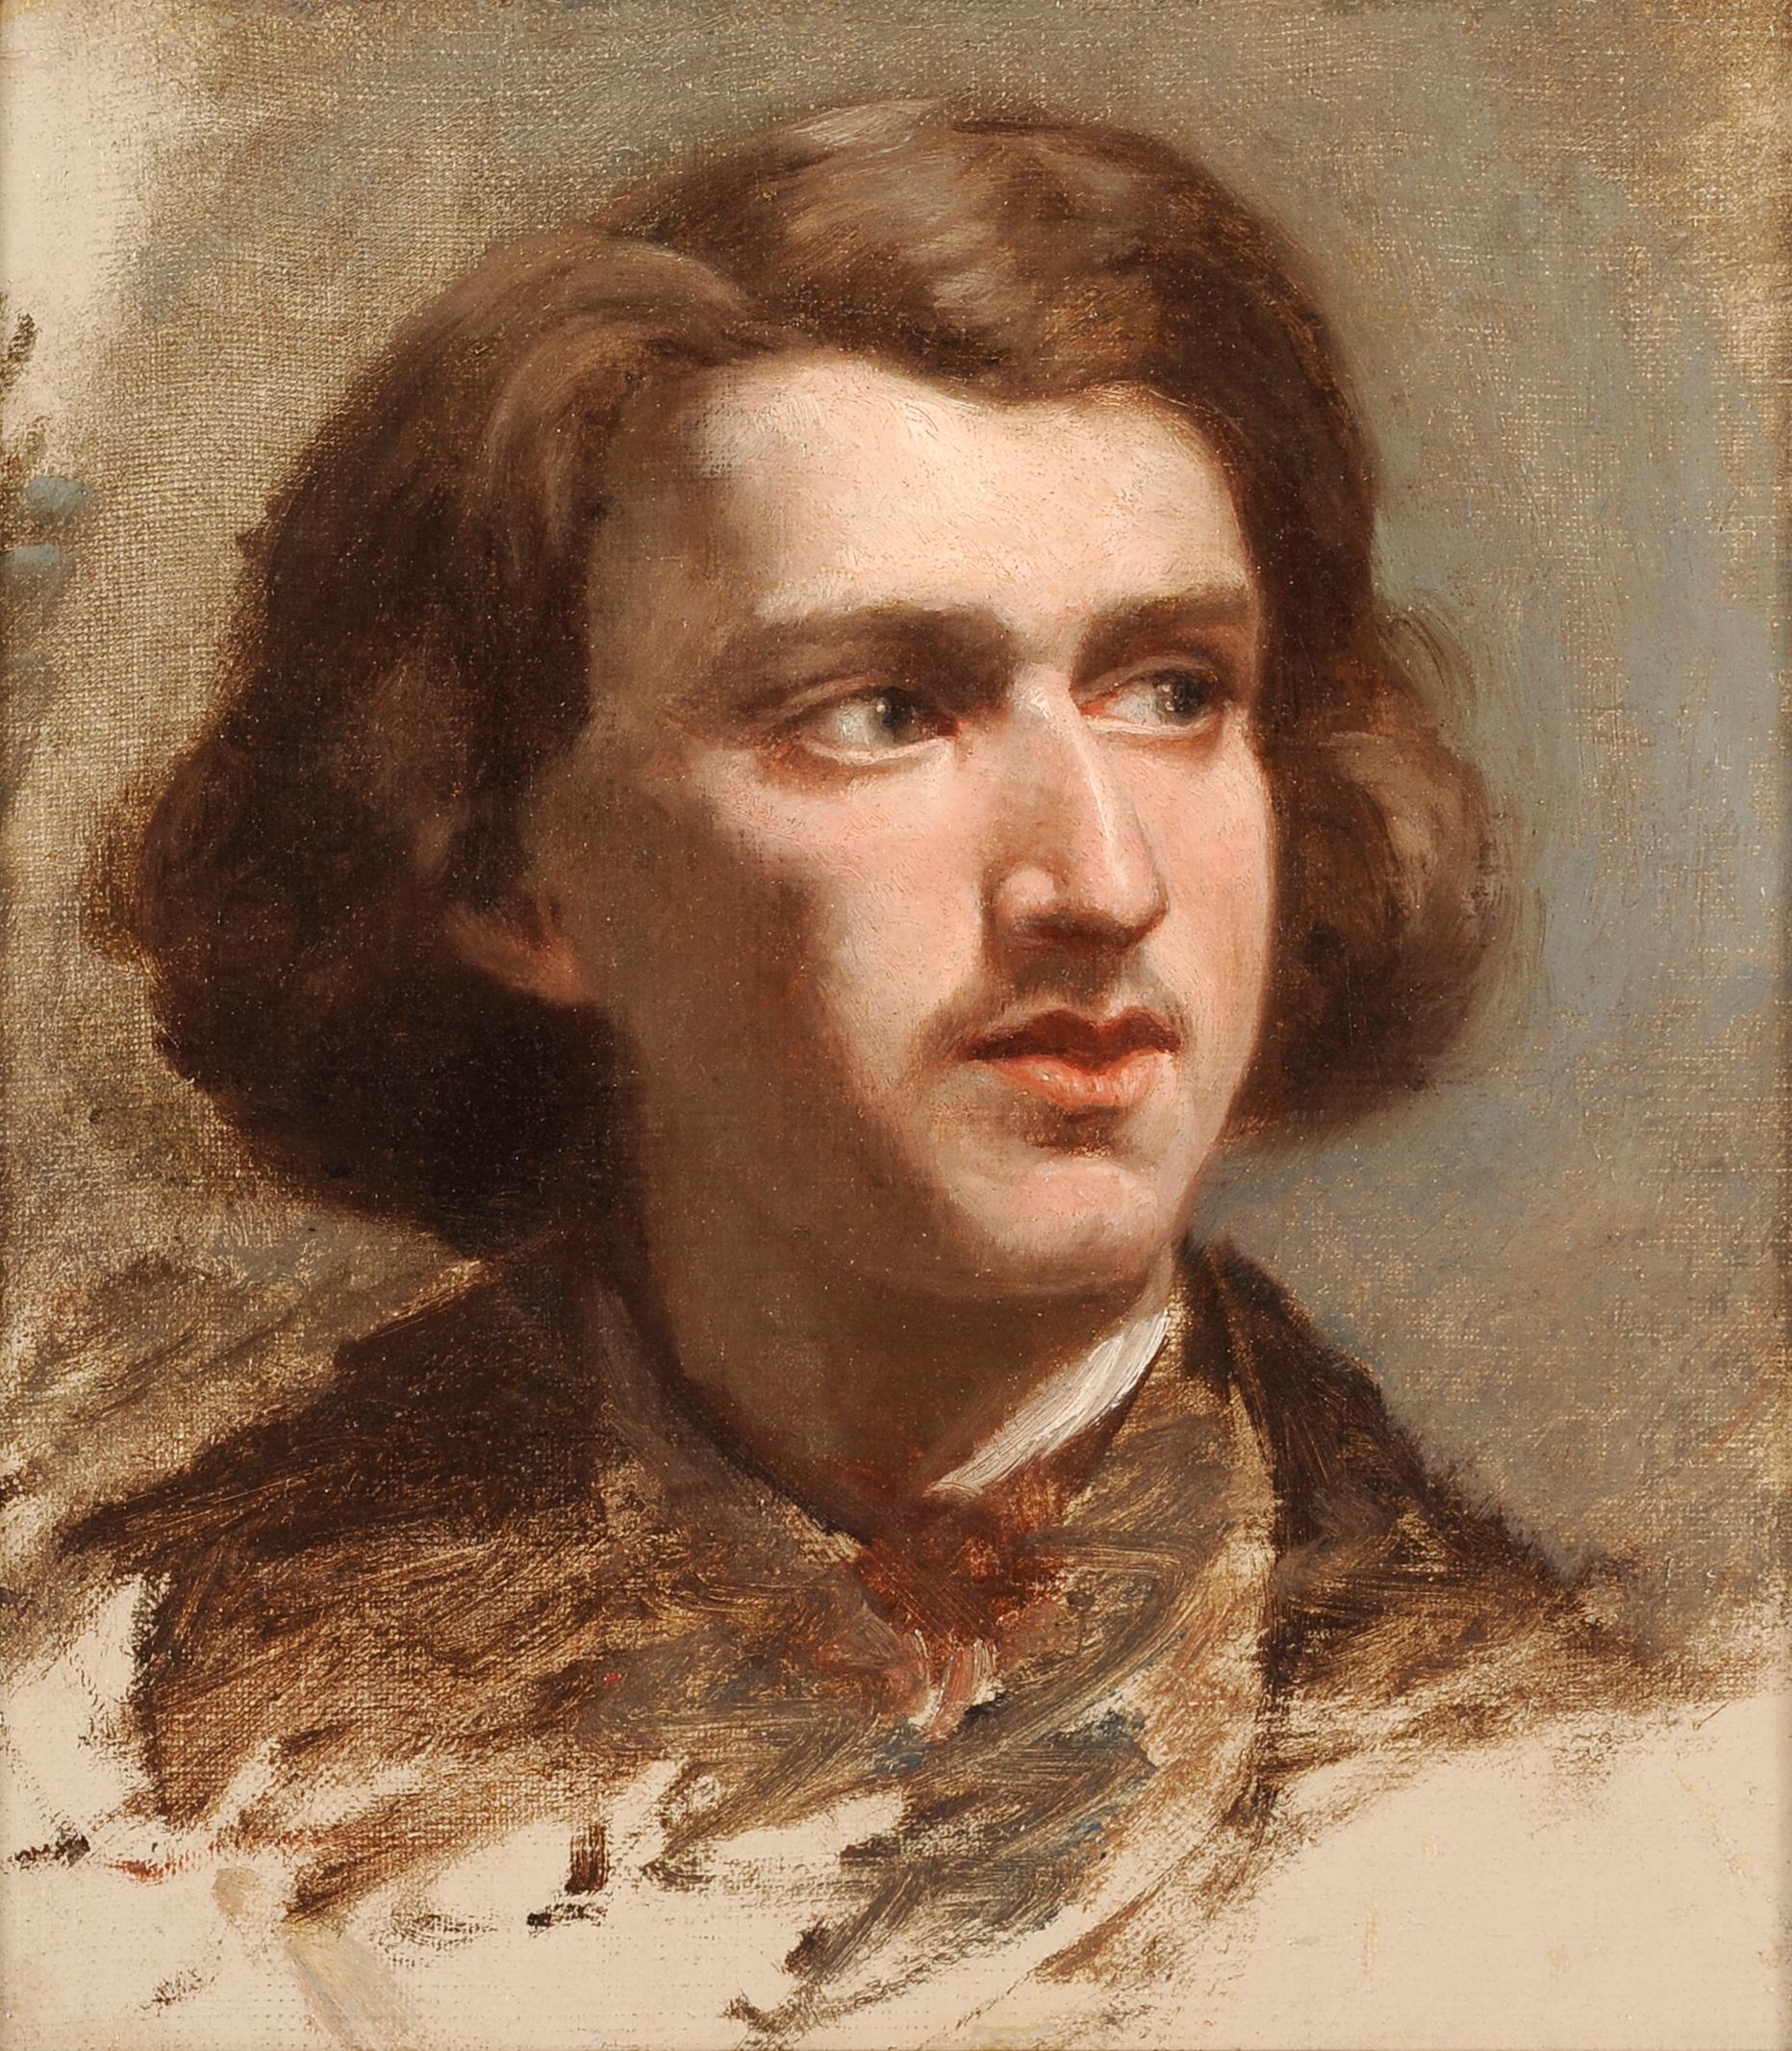 Sketch of a dandy portrait - Painting by Unknown